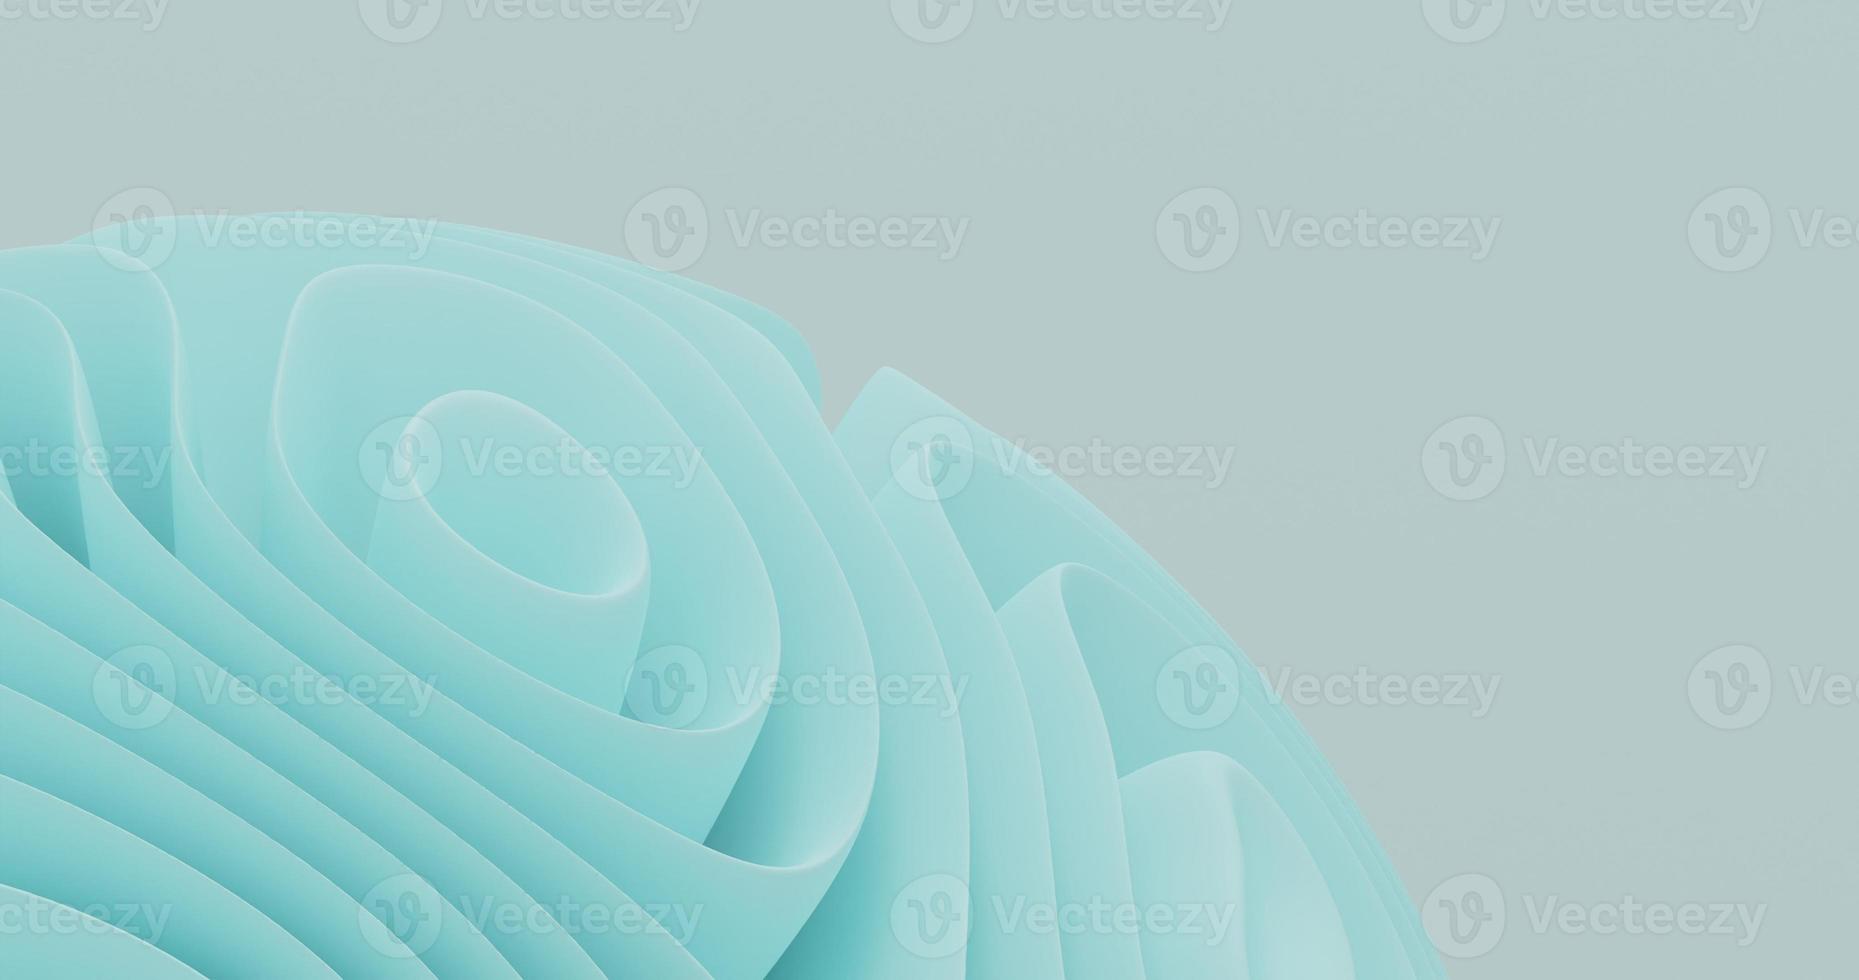 abstract background using objects on the bottom left using a fold pattern like light blue flowers, 3d rendering and 4K size photo